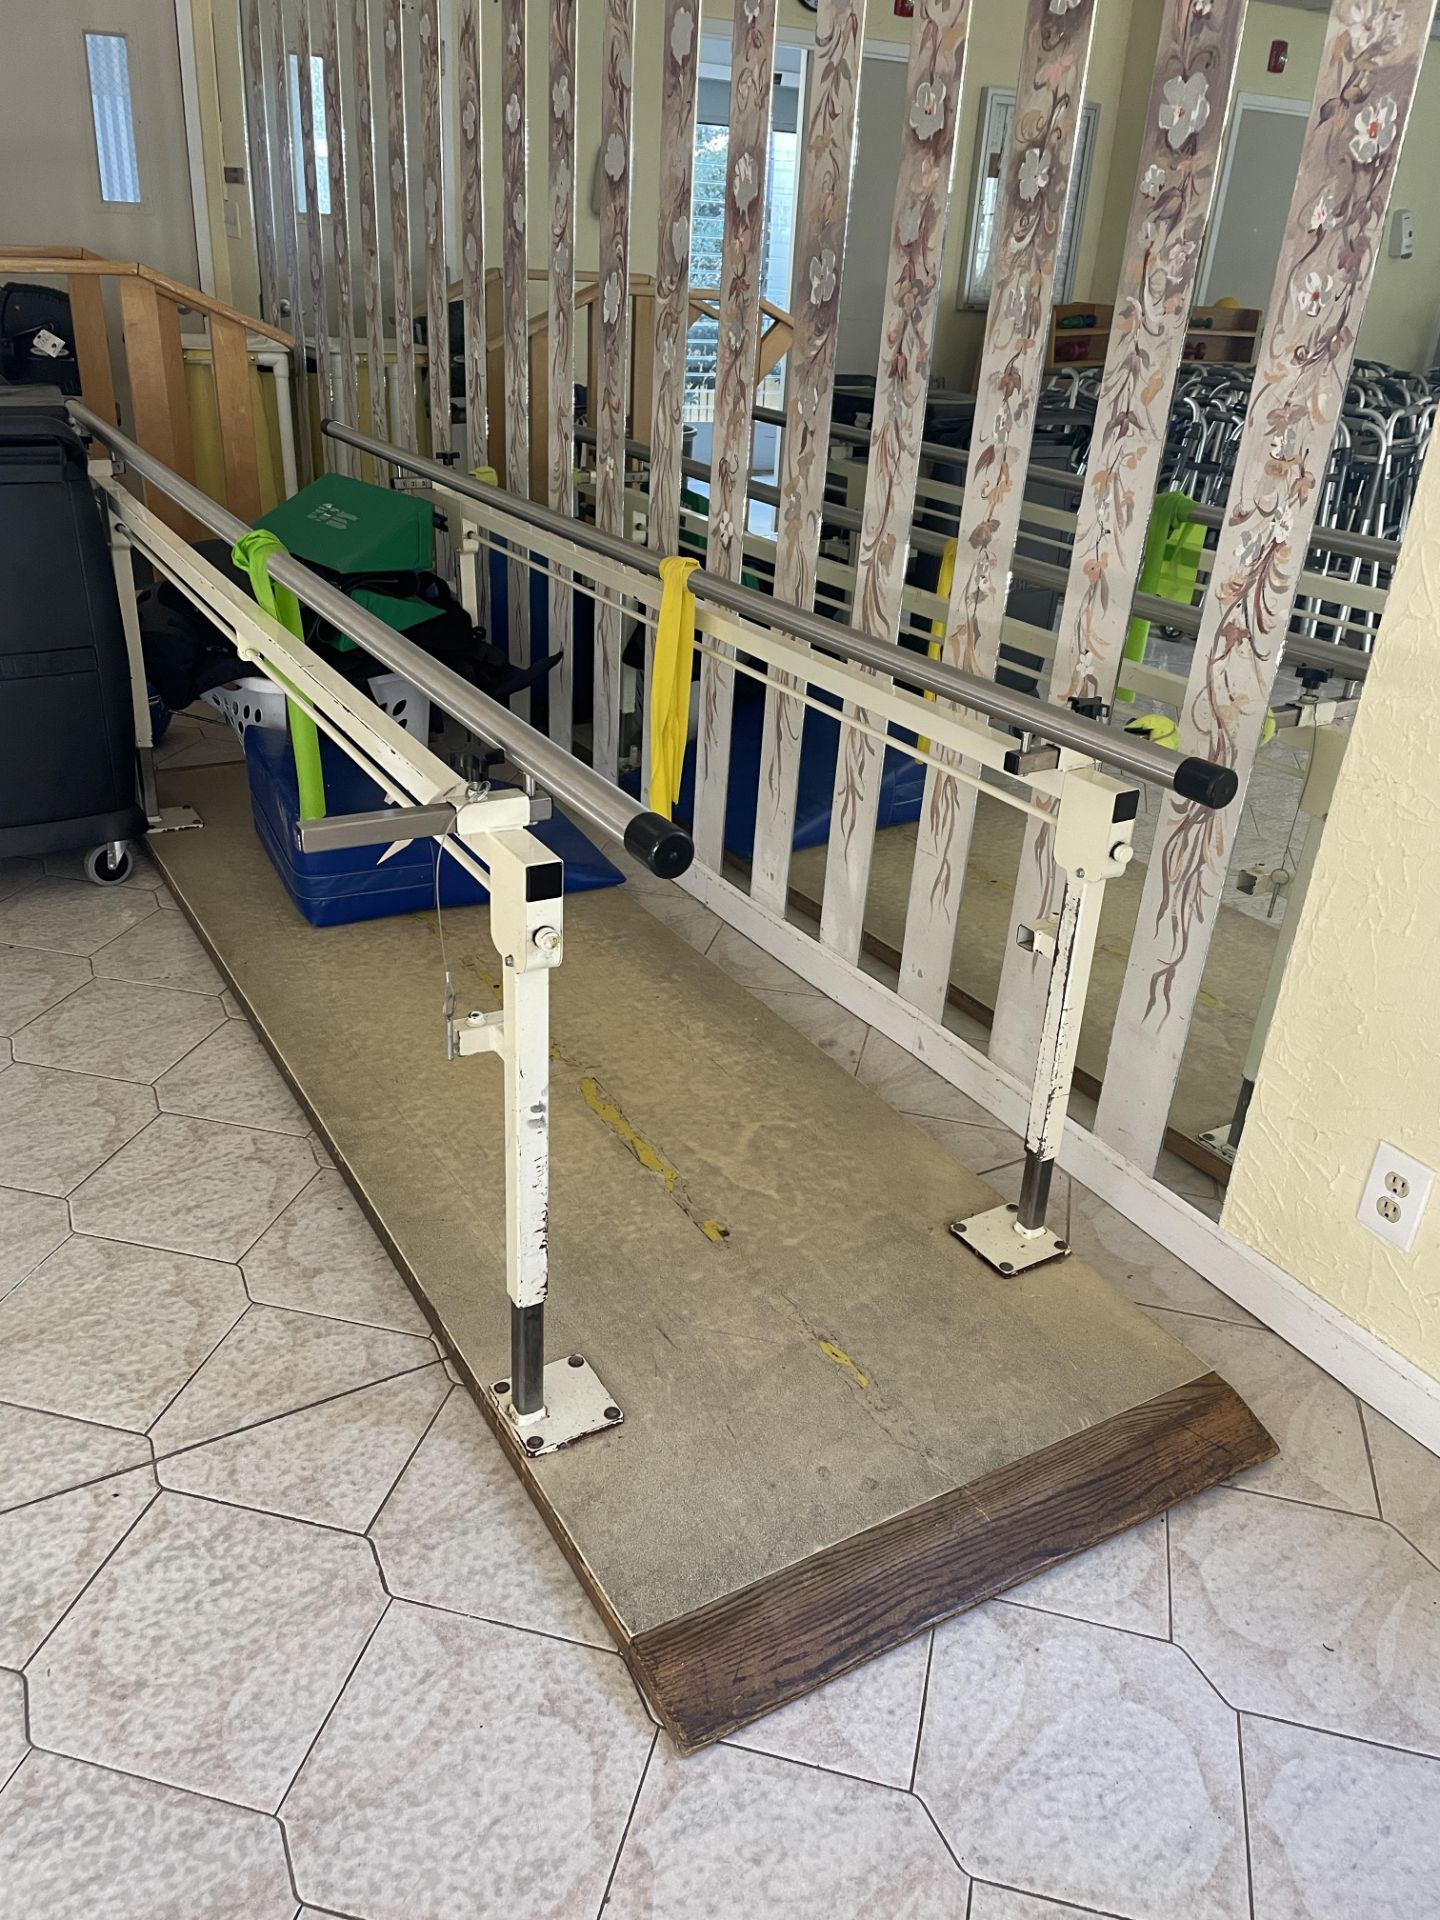 {LOT} Midland Adjustable Handle Balance Physical Therapy Walk Training Unit, 10' w/Built in Platform - Image 2 of 4